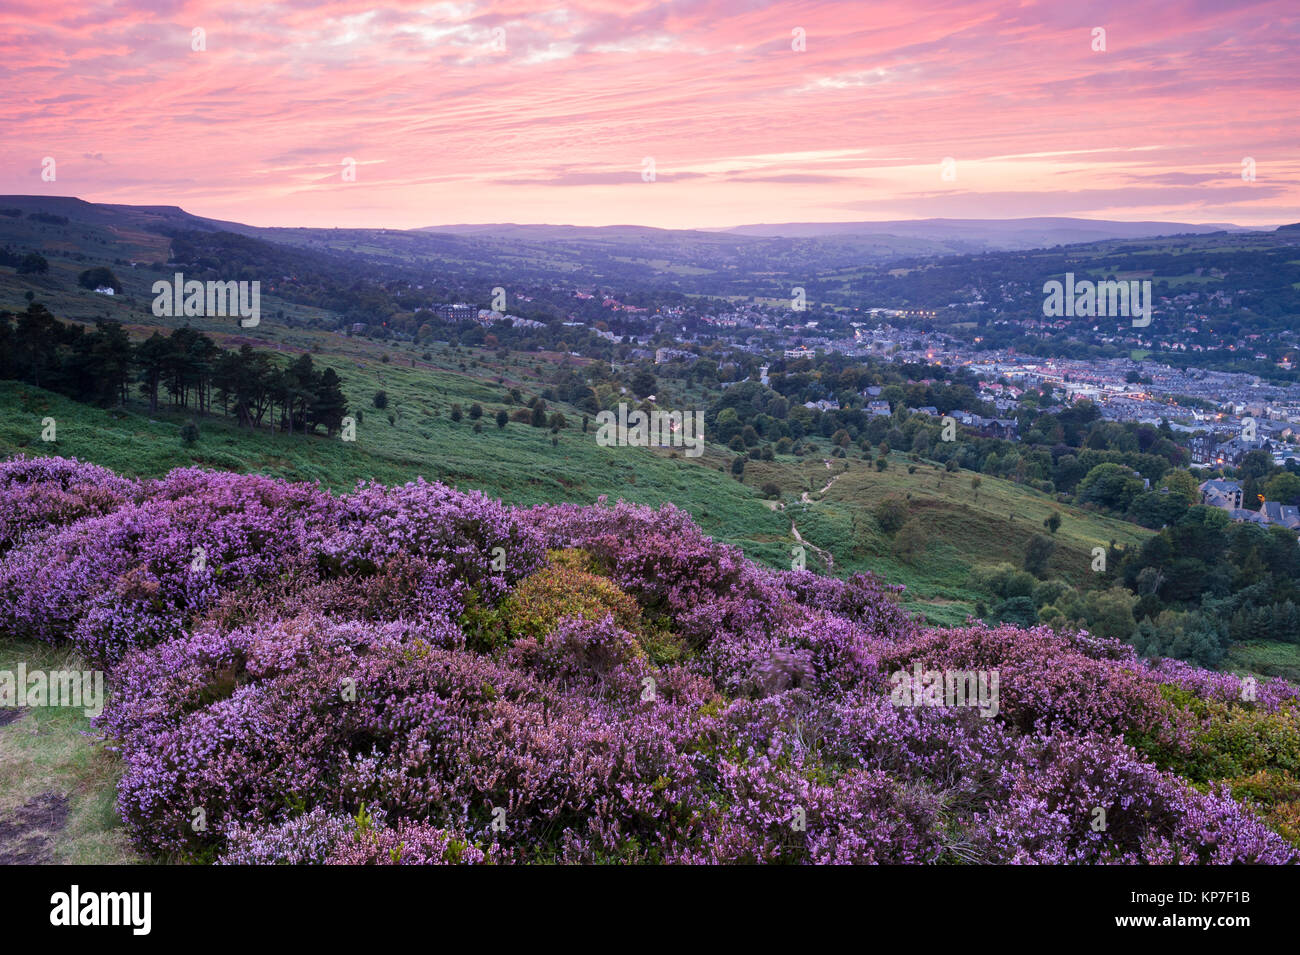 Deep pink sunset sky & high view from picturesque Ilkley Moor over town nestling in valley (purple heather) - Ilkley, Wharfedale, Yorkshire, GB, UK Stock Photo